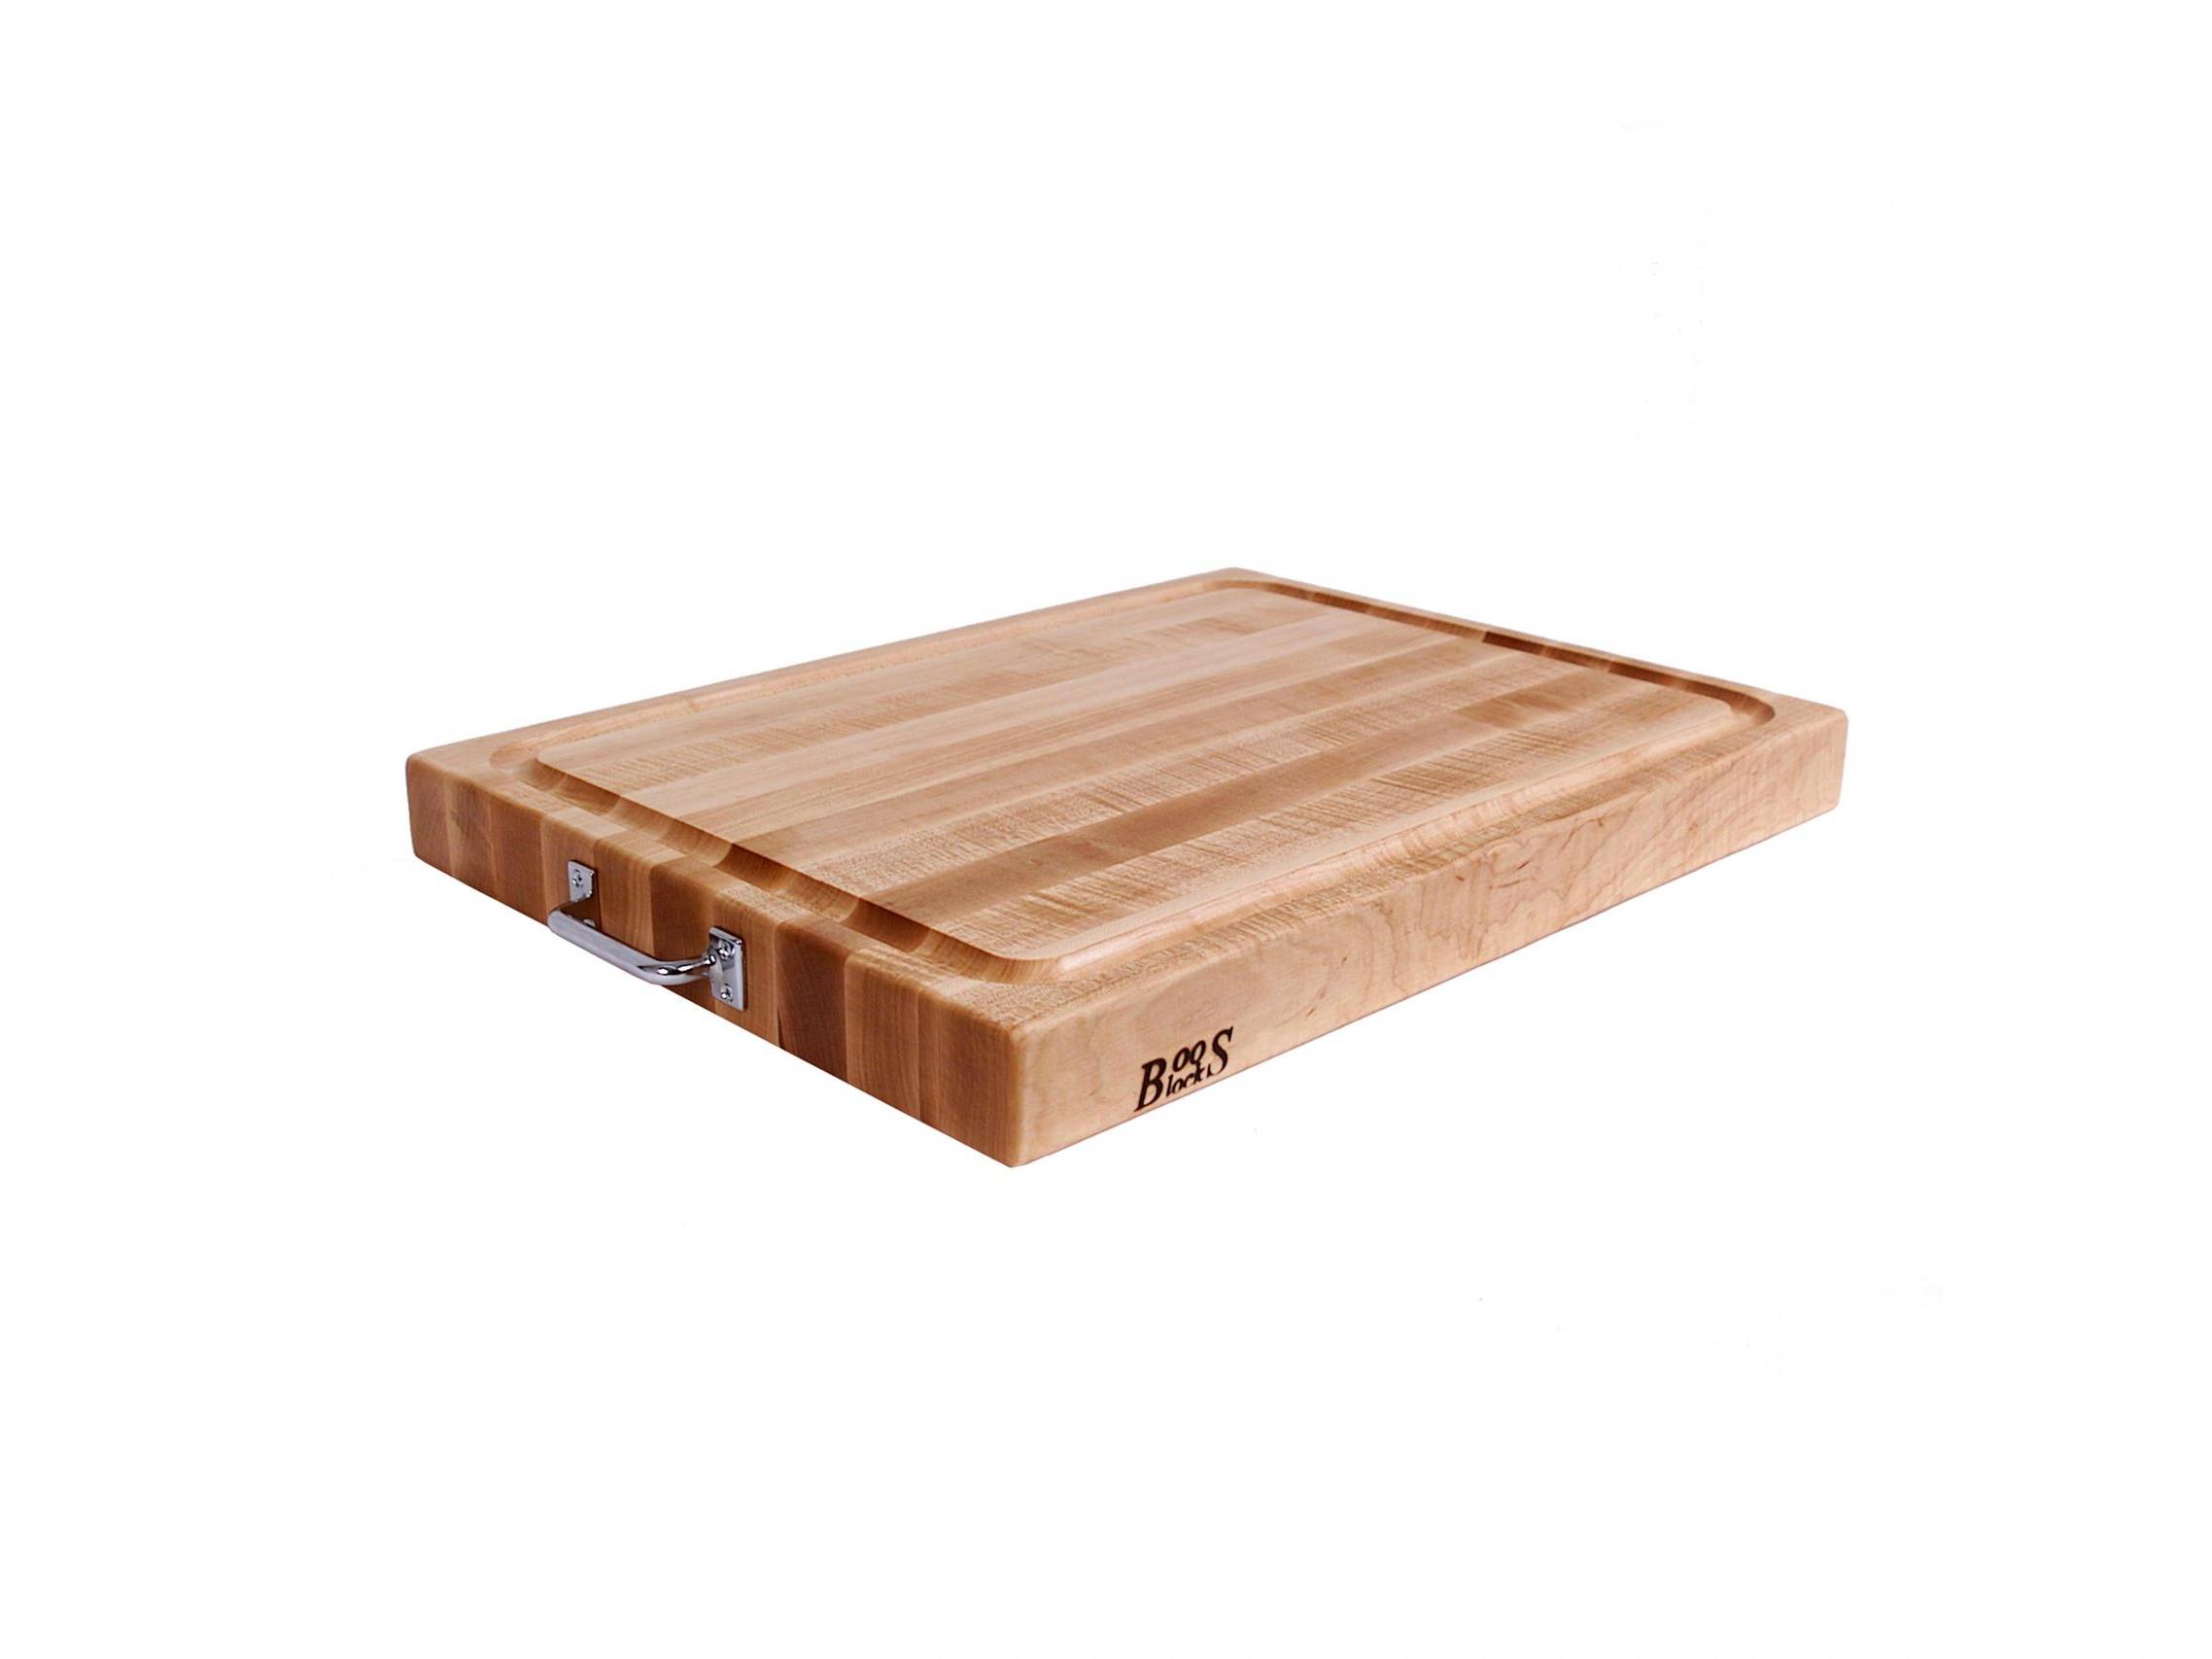 Prep-N-Serve Hard Maple Cutting Board with Juice Groove, Stainless Steel Handles; Can Be Used on Both Sides 59